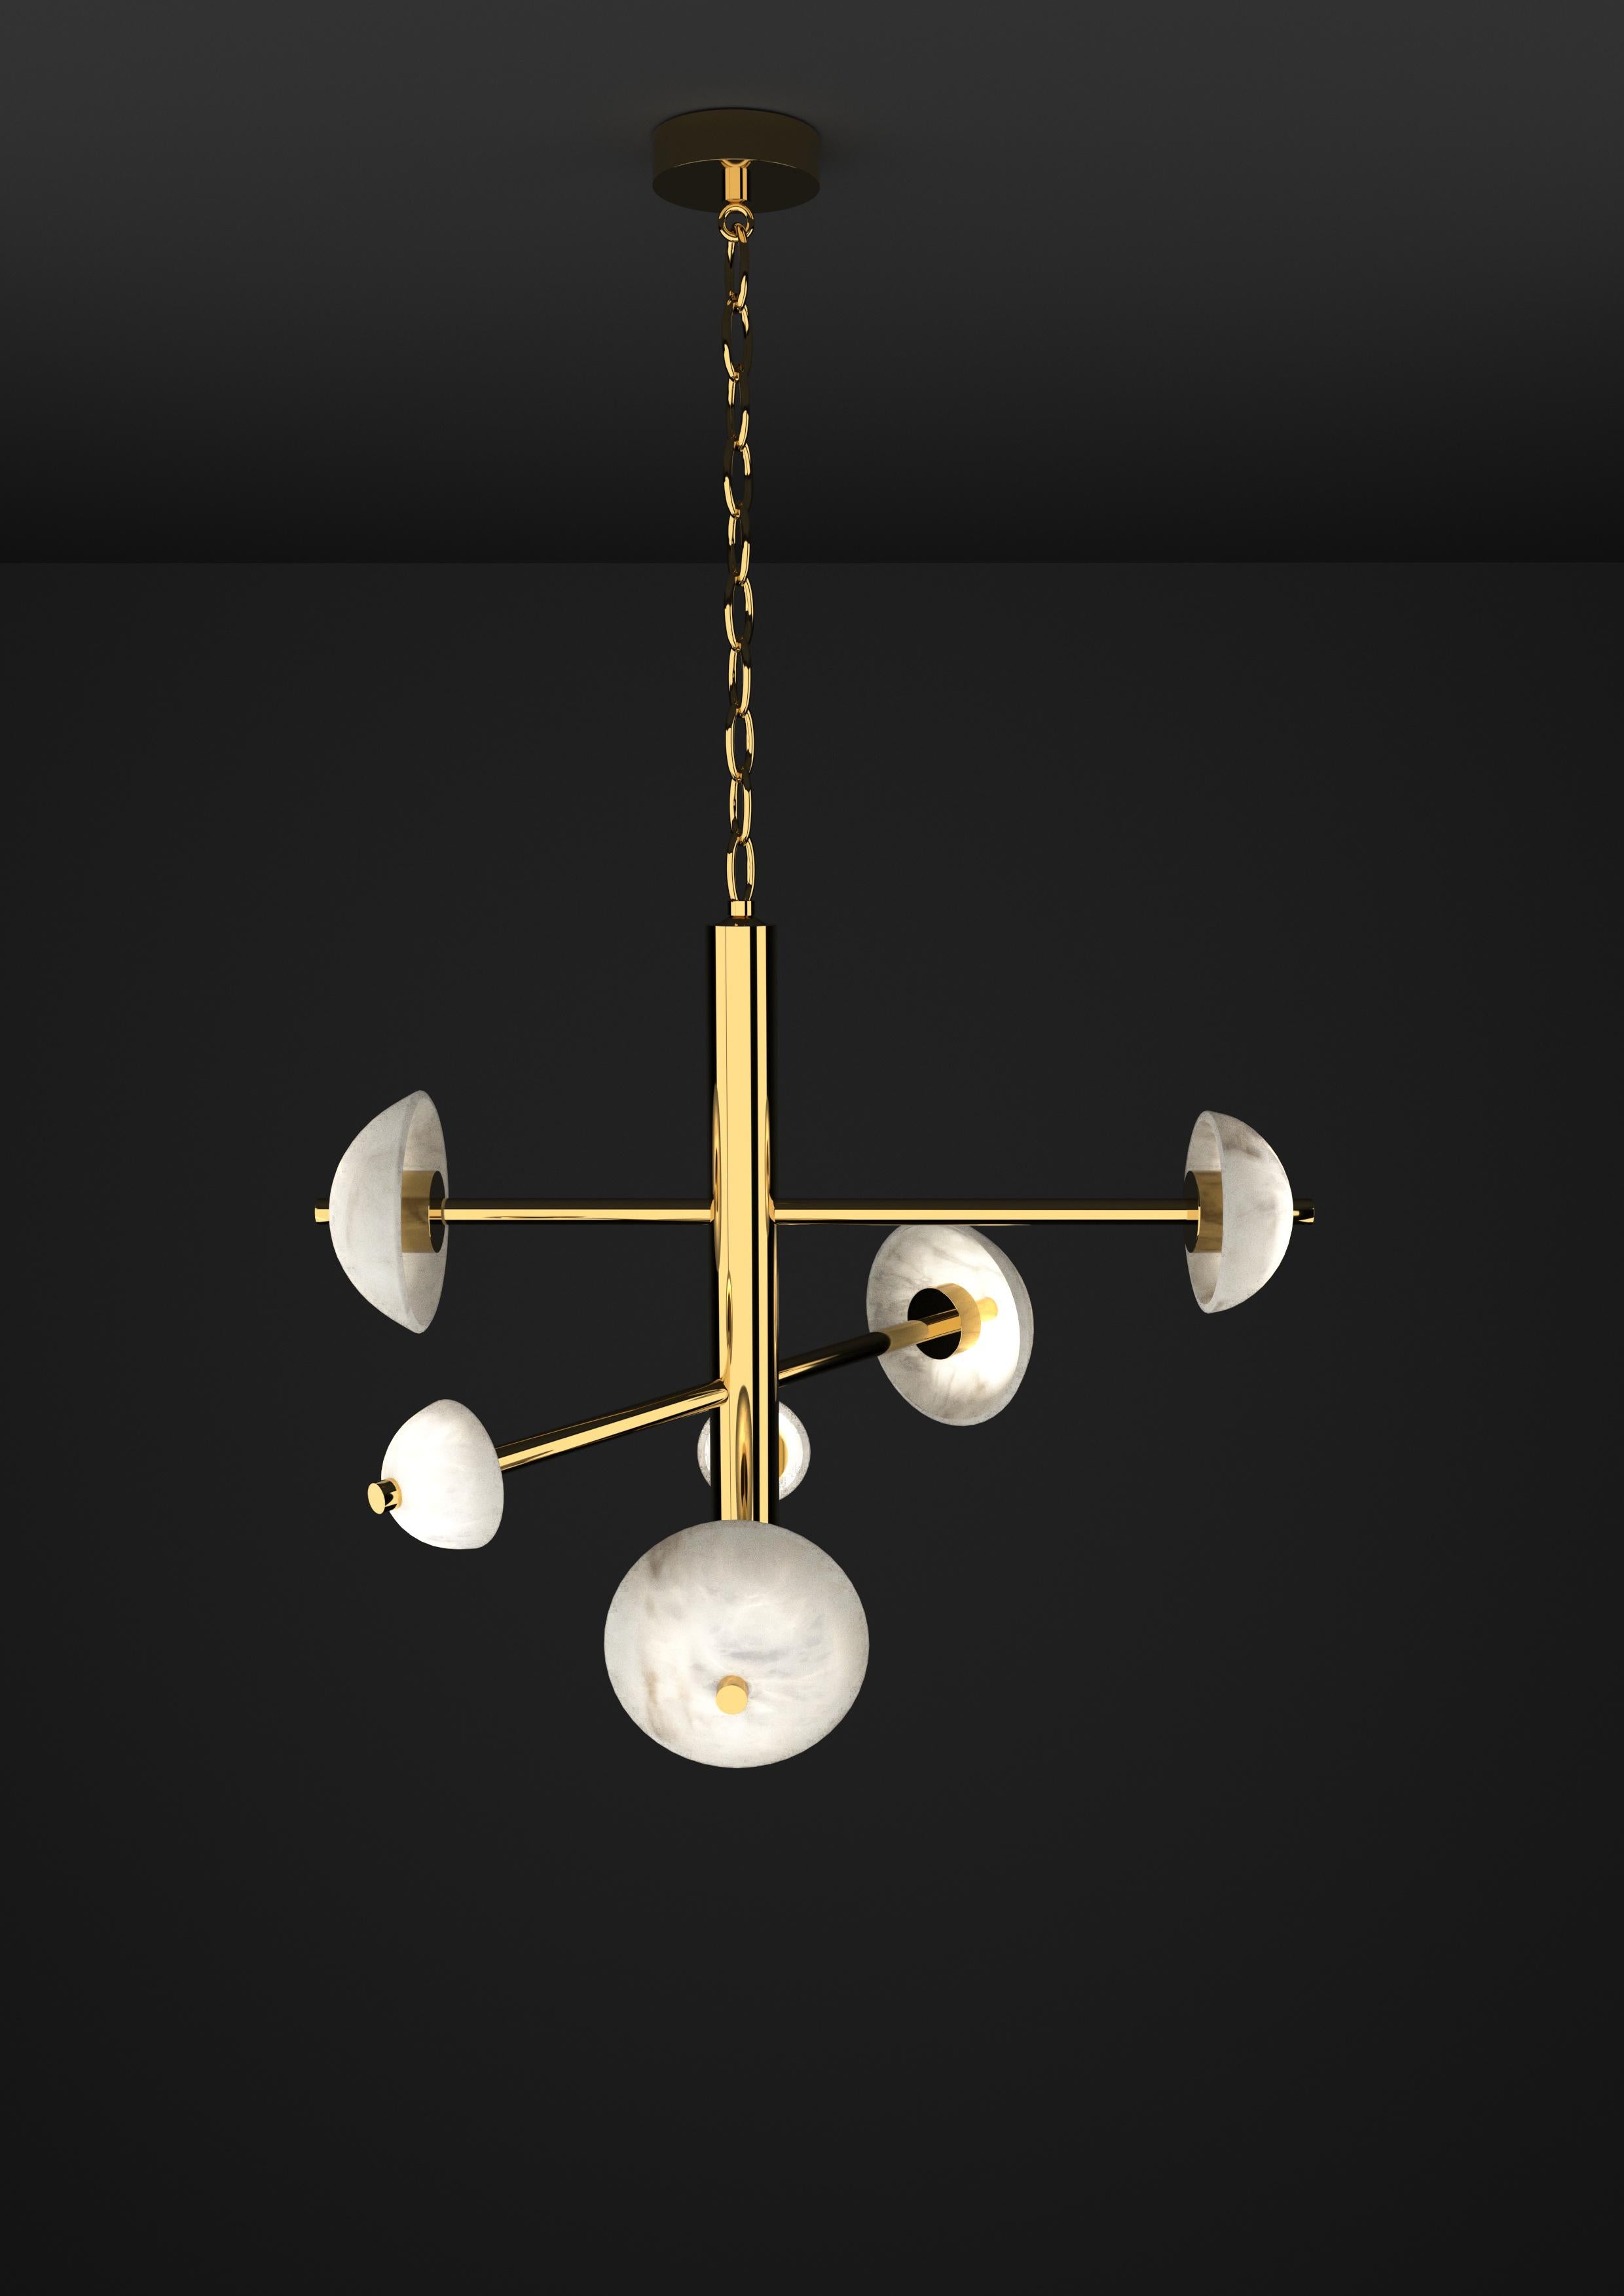 Apollo Shiny Gold Metal Pendant Lamp by Alabastro Italiano
Dimensions: D 70,5 x W 54 x H 64 cm.
Materials: White alabaster and metal.

Available in different finishes: Shiny Silver, Bronze, Brushed Brass, Ruggine of Florence, Brushed Burnished,